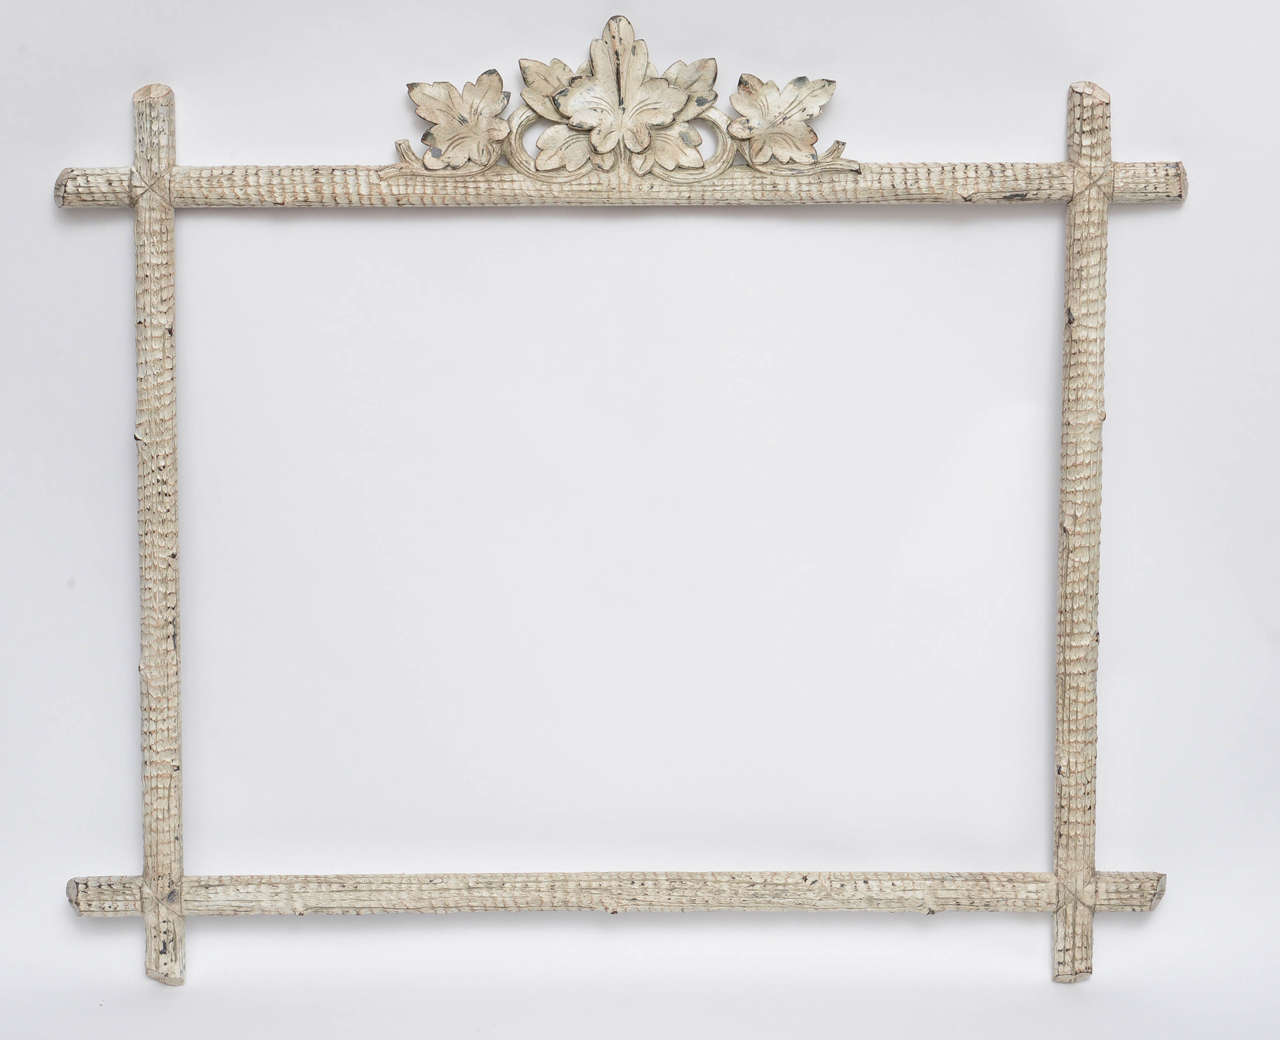 Directional Black Forest frame with a custom antique wash over a detailed hand carved details.  Frame only to house a mirror or work of art.  Other smaller frames are available, plus a small guest towel bar with a framed feature.